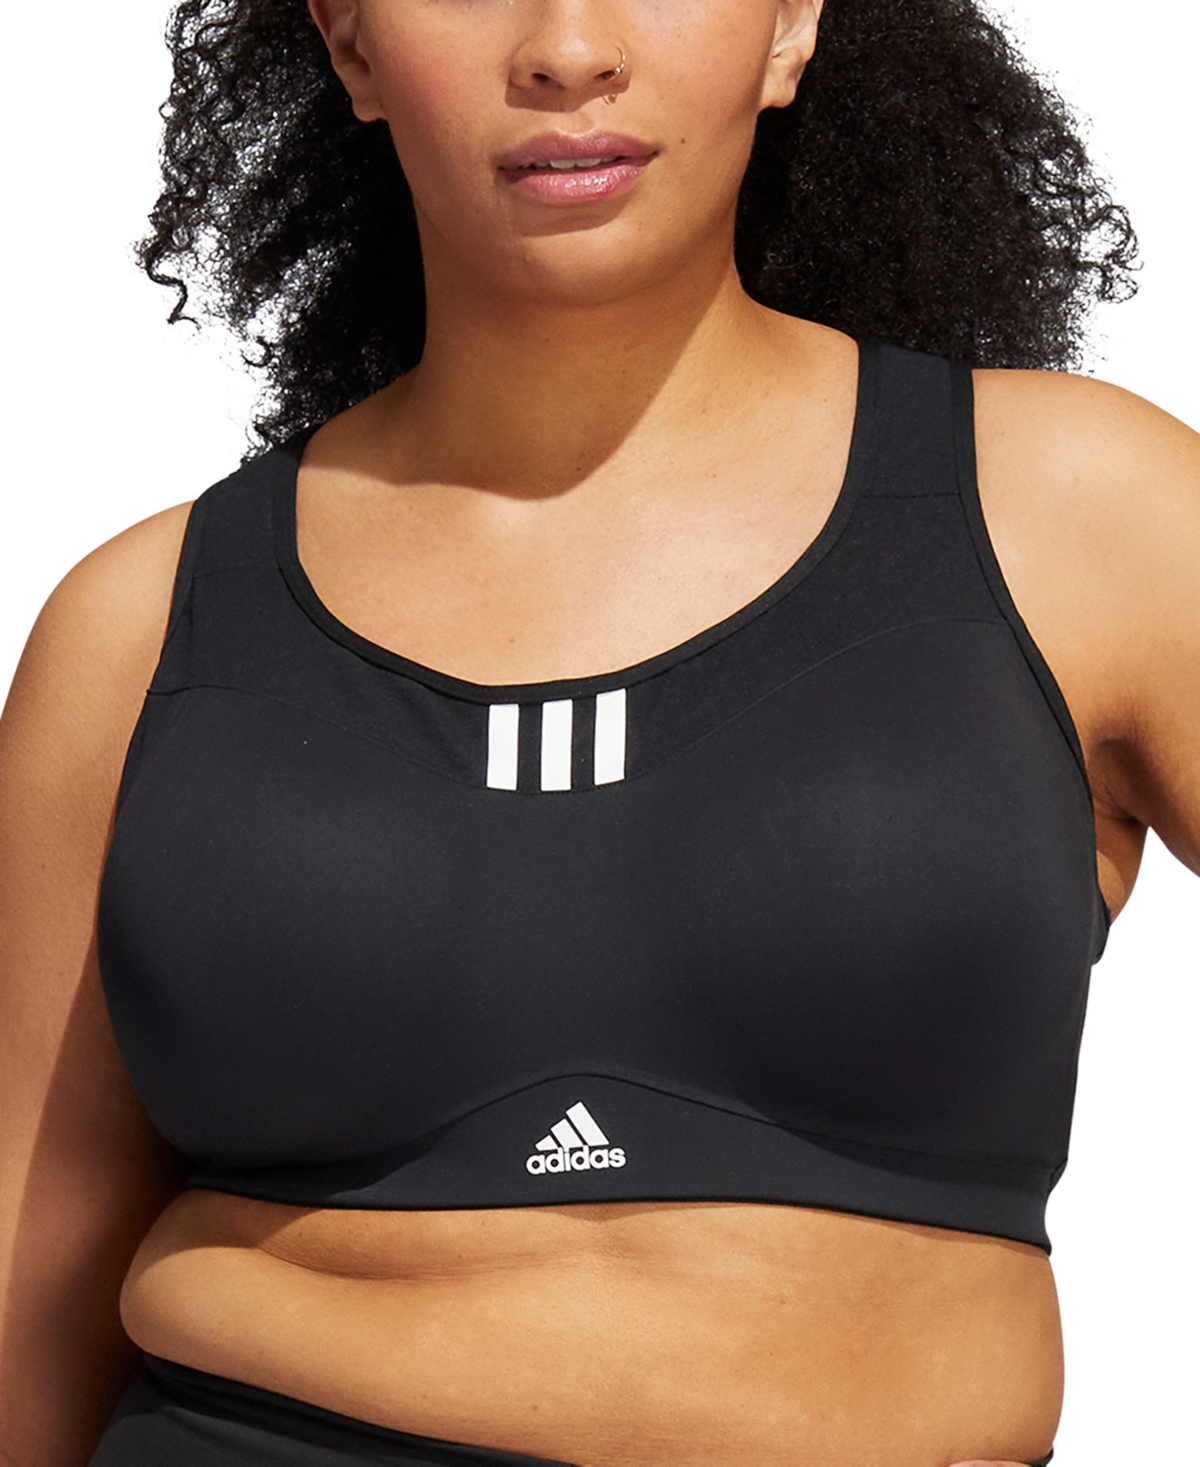 adidas Plus Size Tlrd Impact Training High-Support Bra